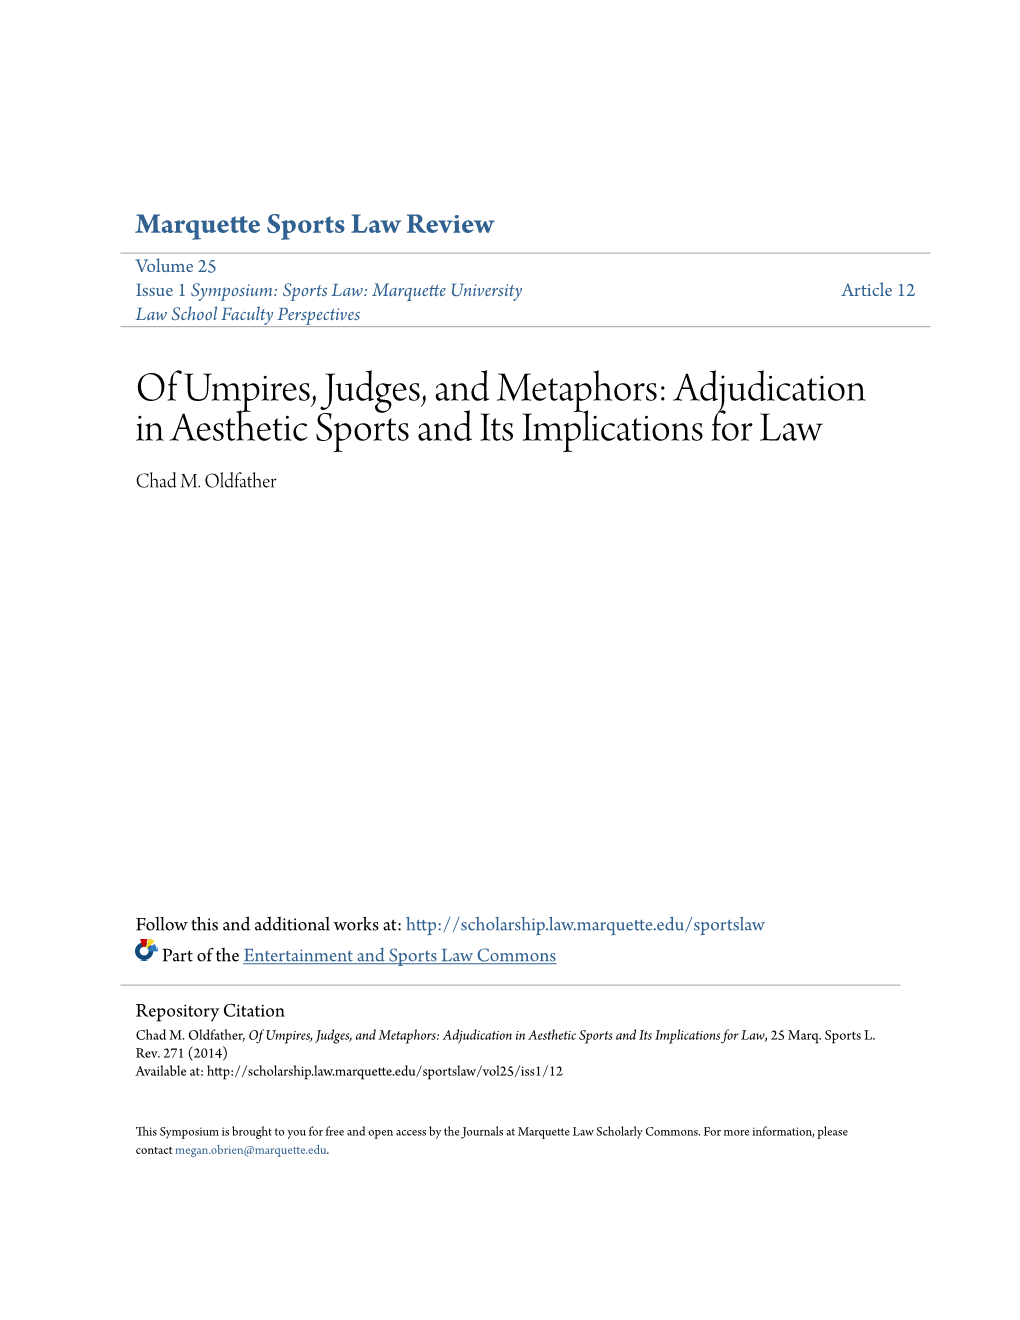 Of Umpires, Judges, and Metaphors: Adjudication in Aesthetic Sports and Its Implications for Law Chad M